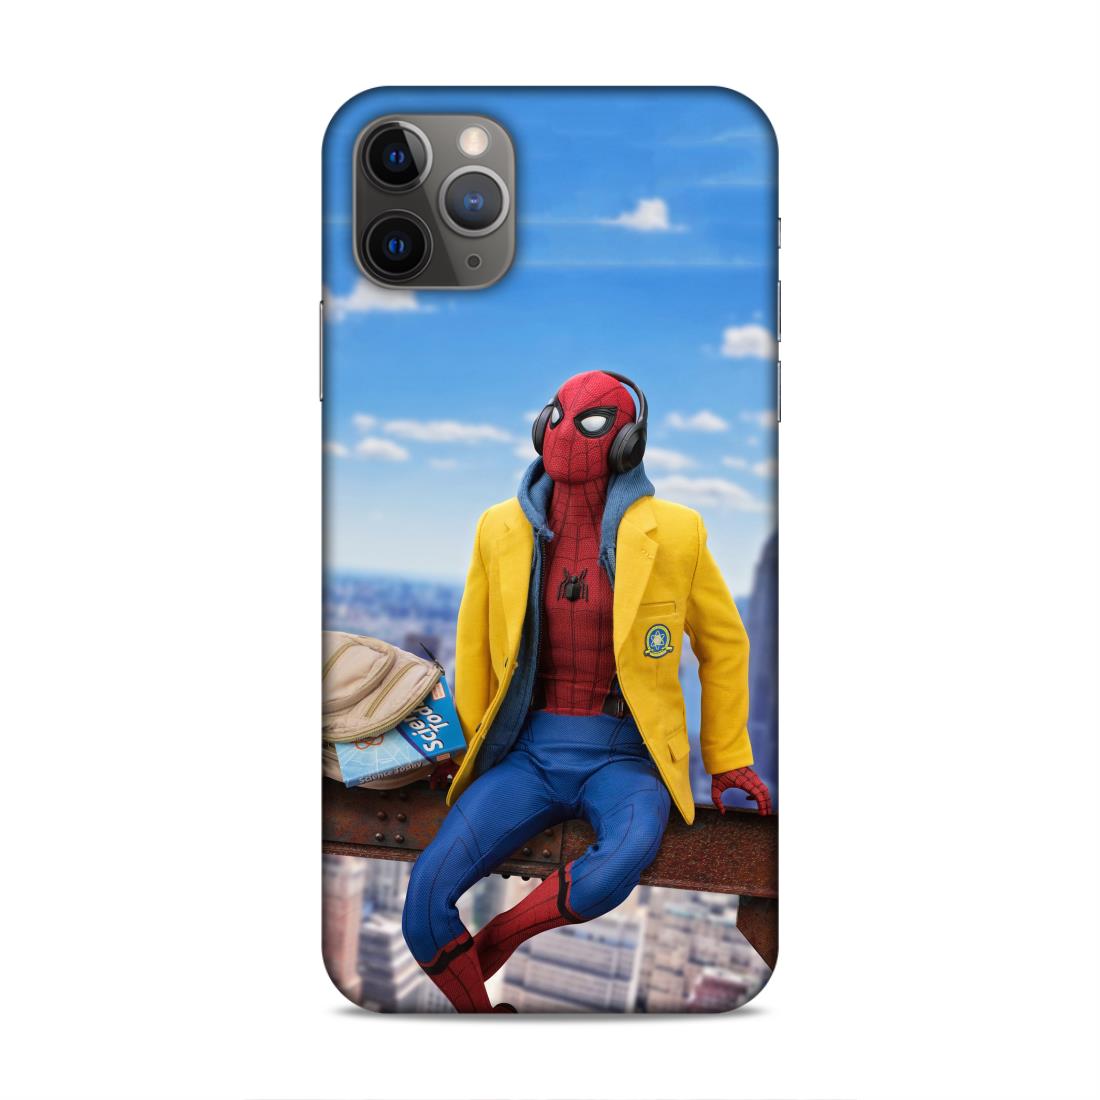 Cool Spiderman Hard Back Case For Apple iPhone 11 Pro Max